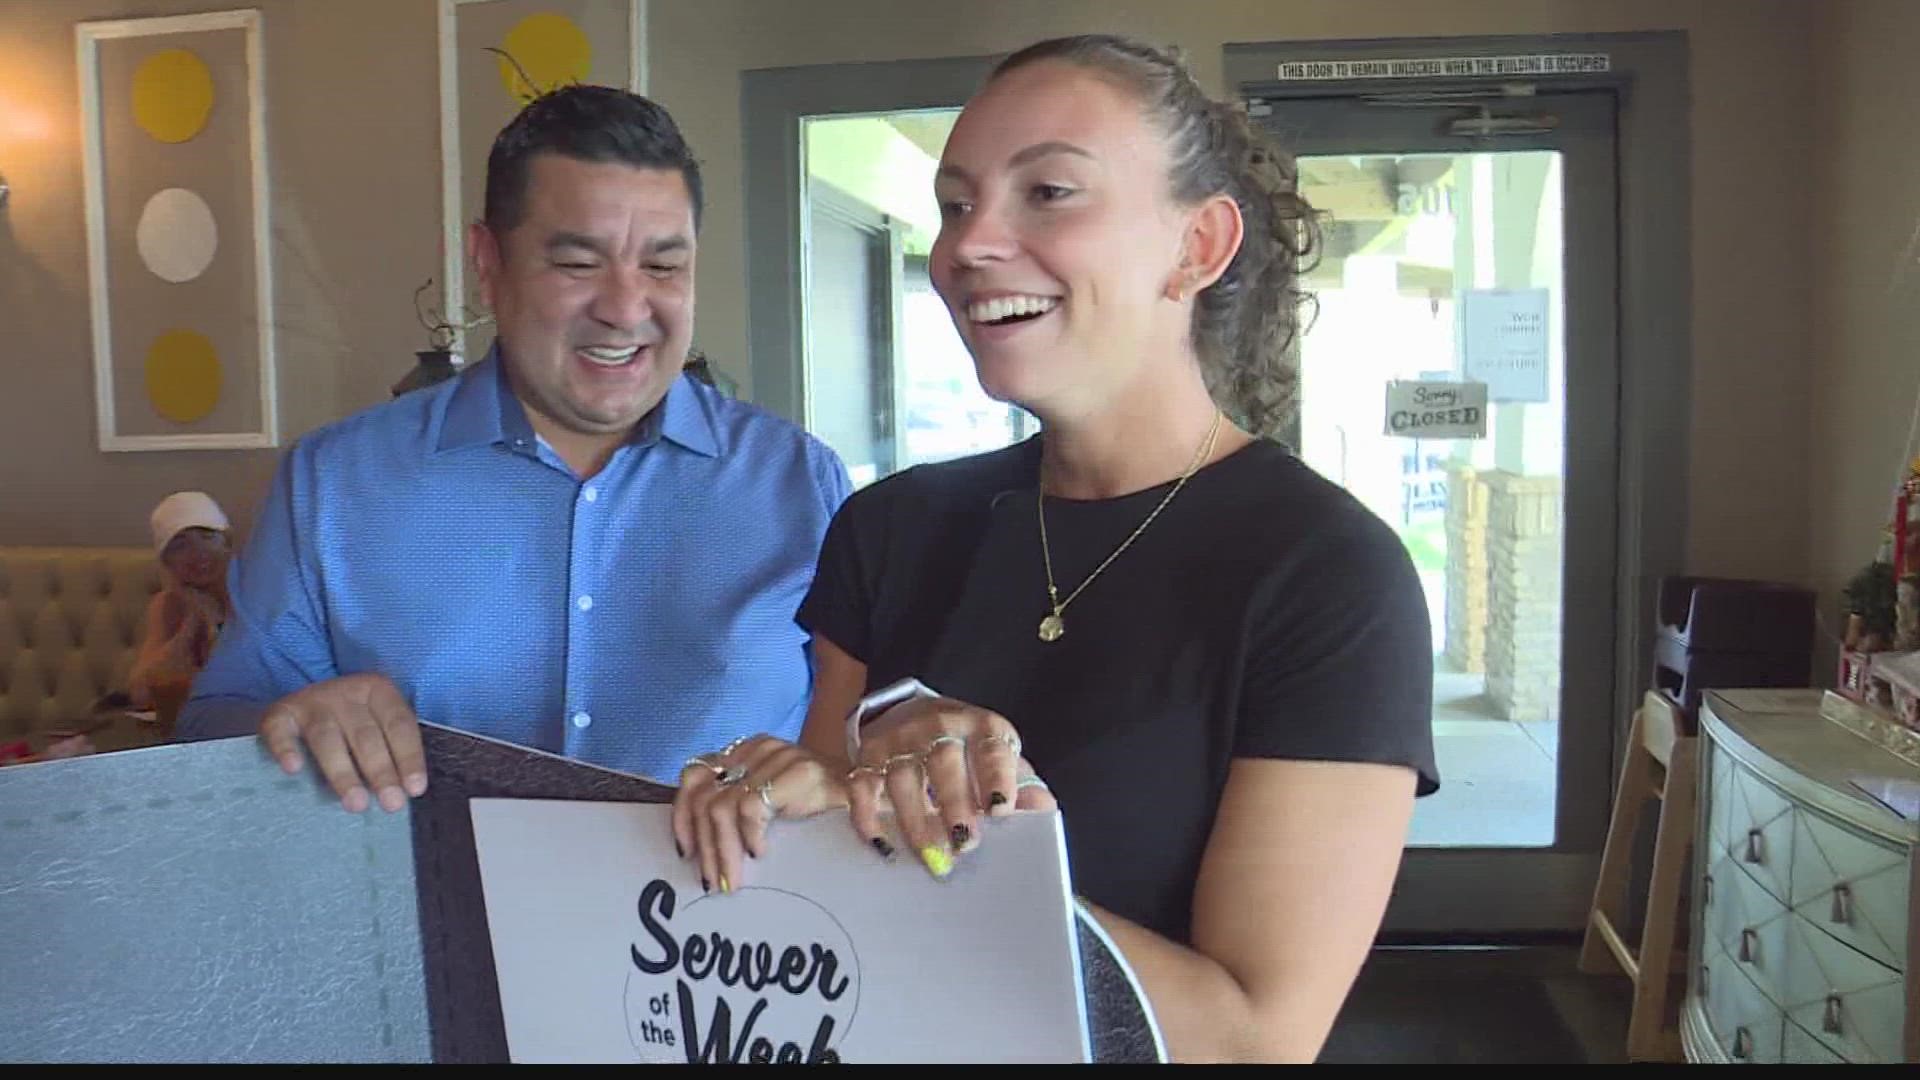 See how one local server is vaulting her way into her customer's hearts with great service.